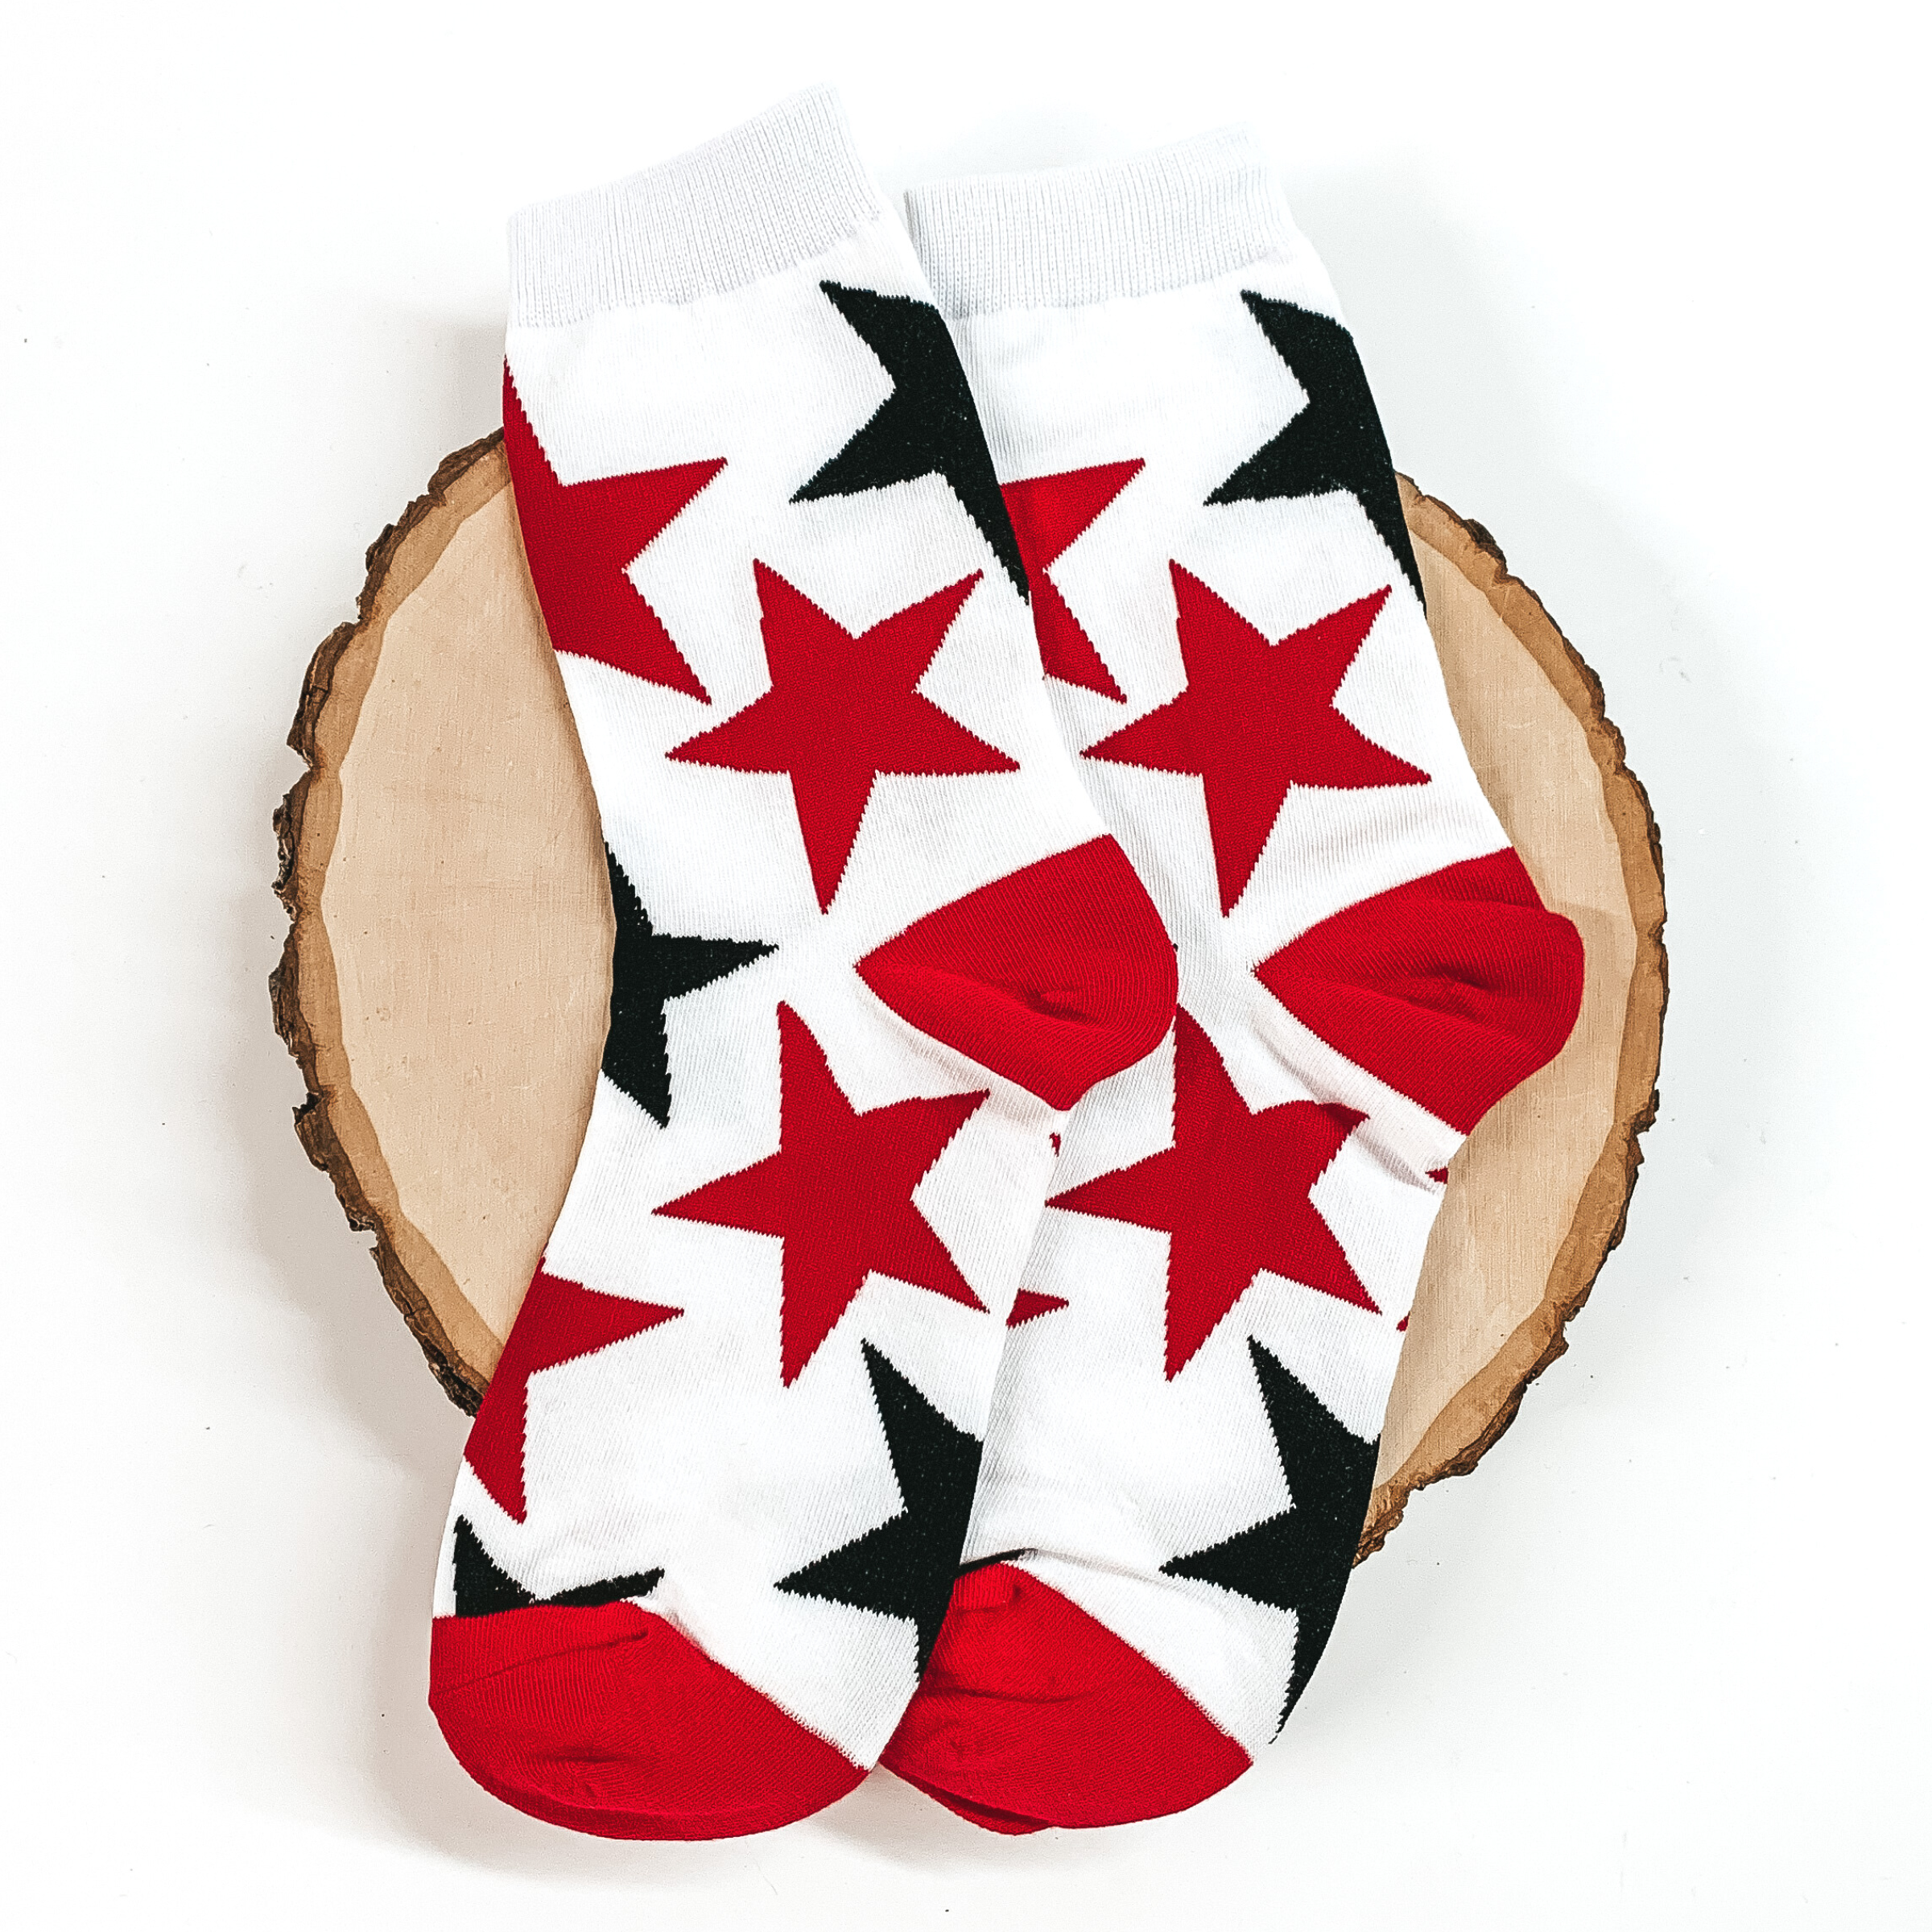 White ankle socks with a black and red star print. These socks are pictured on a piece of wood on a white background. 